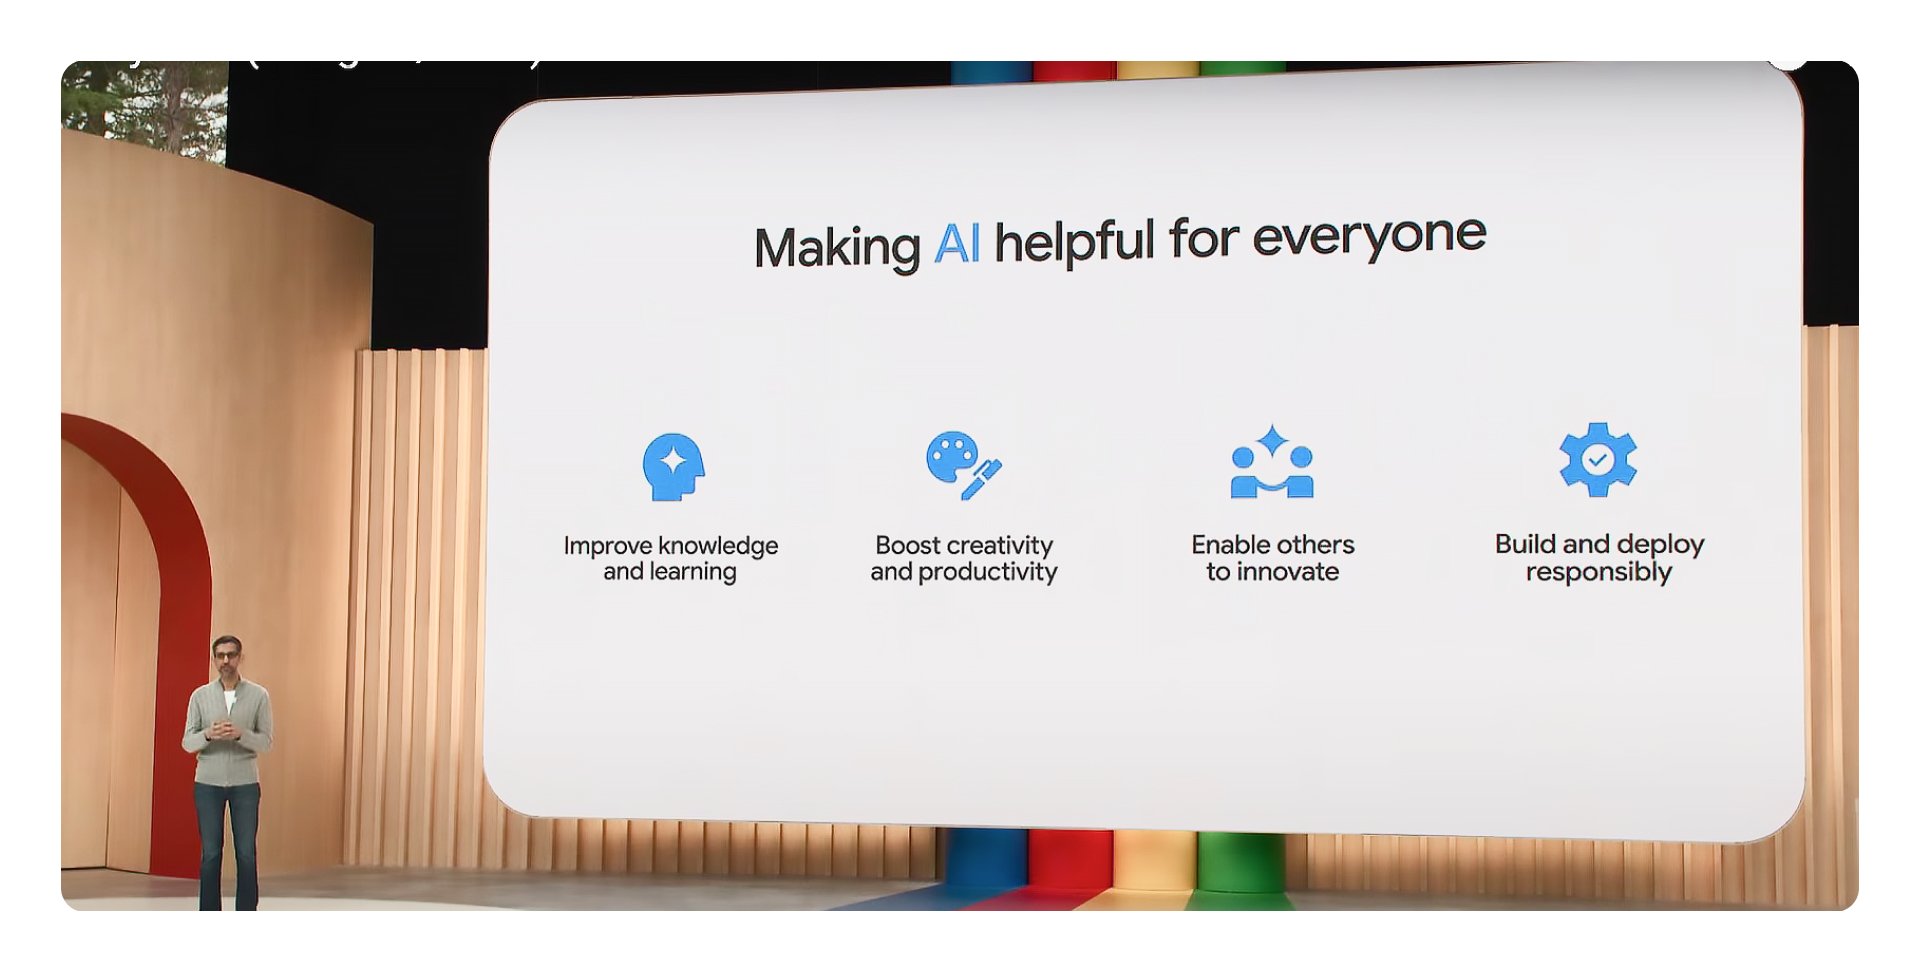 Making AI helping for everyone